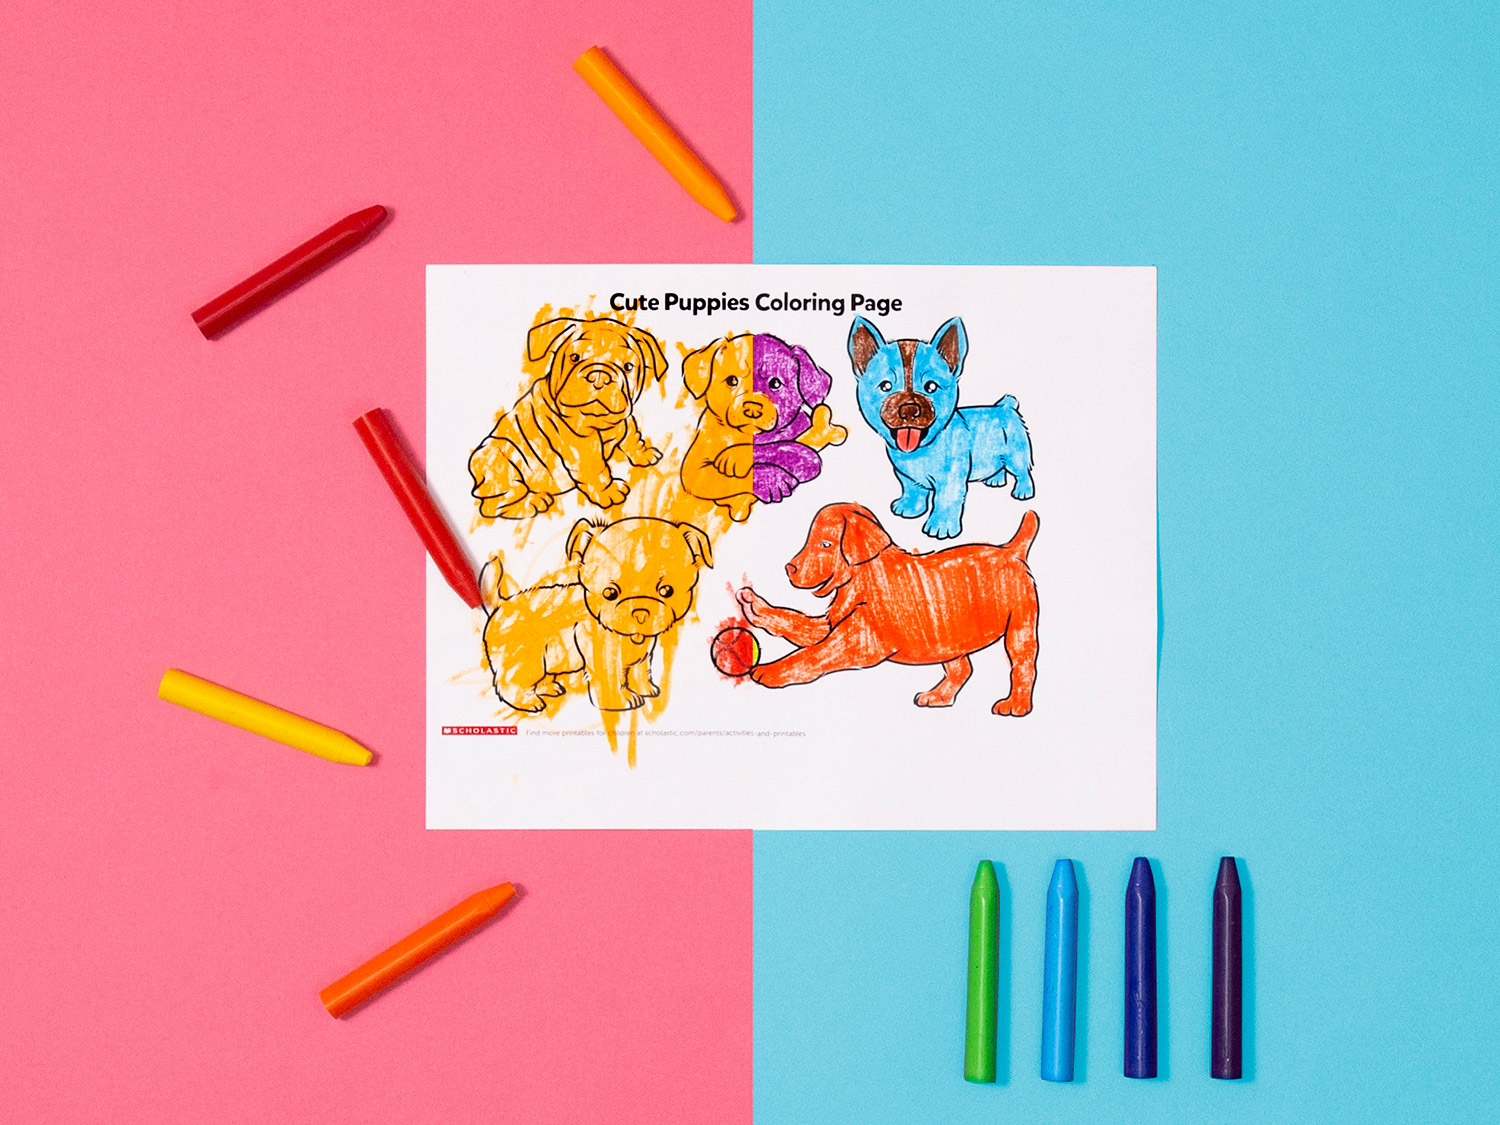 How well should a 4 year old be able to color?